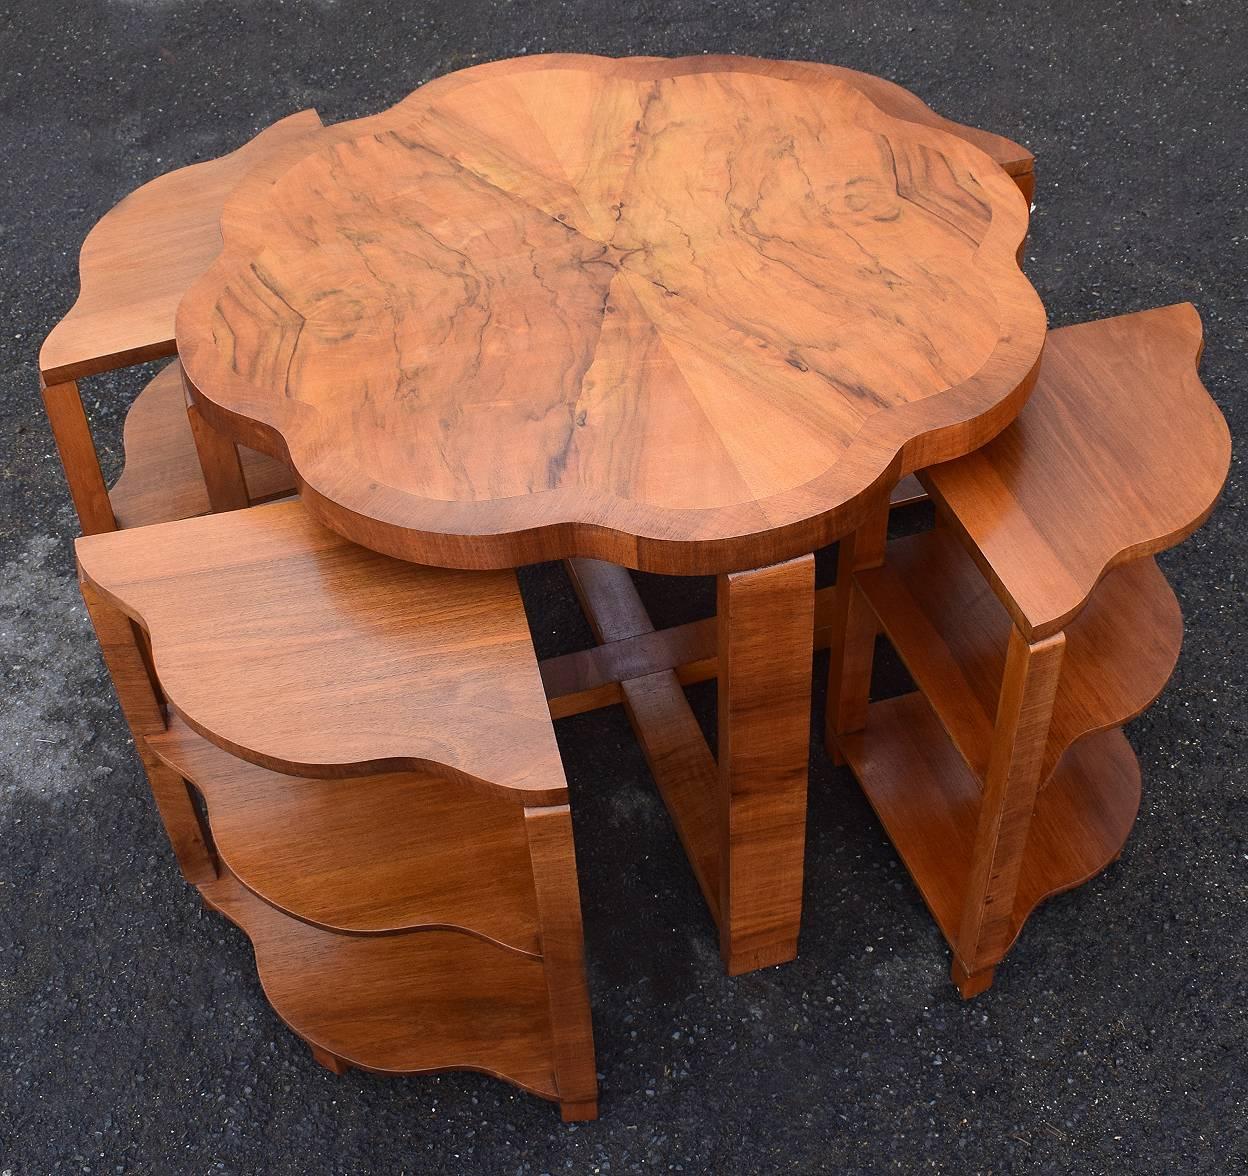 A very stylish 1930's Art Deco nest of tables by Harry & Lou Epstein. The set comprises one large centre table with scalloped edges and four, three tiered triangular inserts with the most exquisite warm walnut veneers. The four pull out side tables